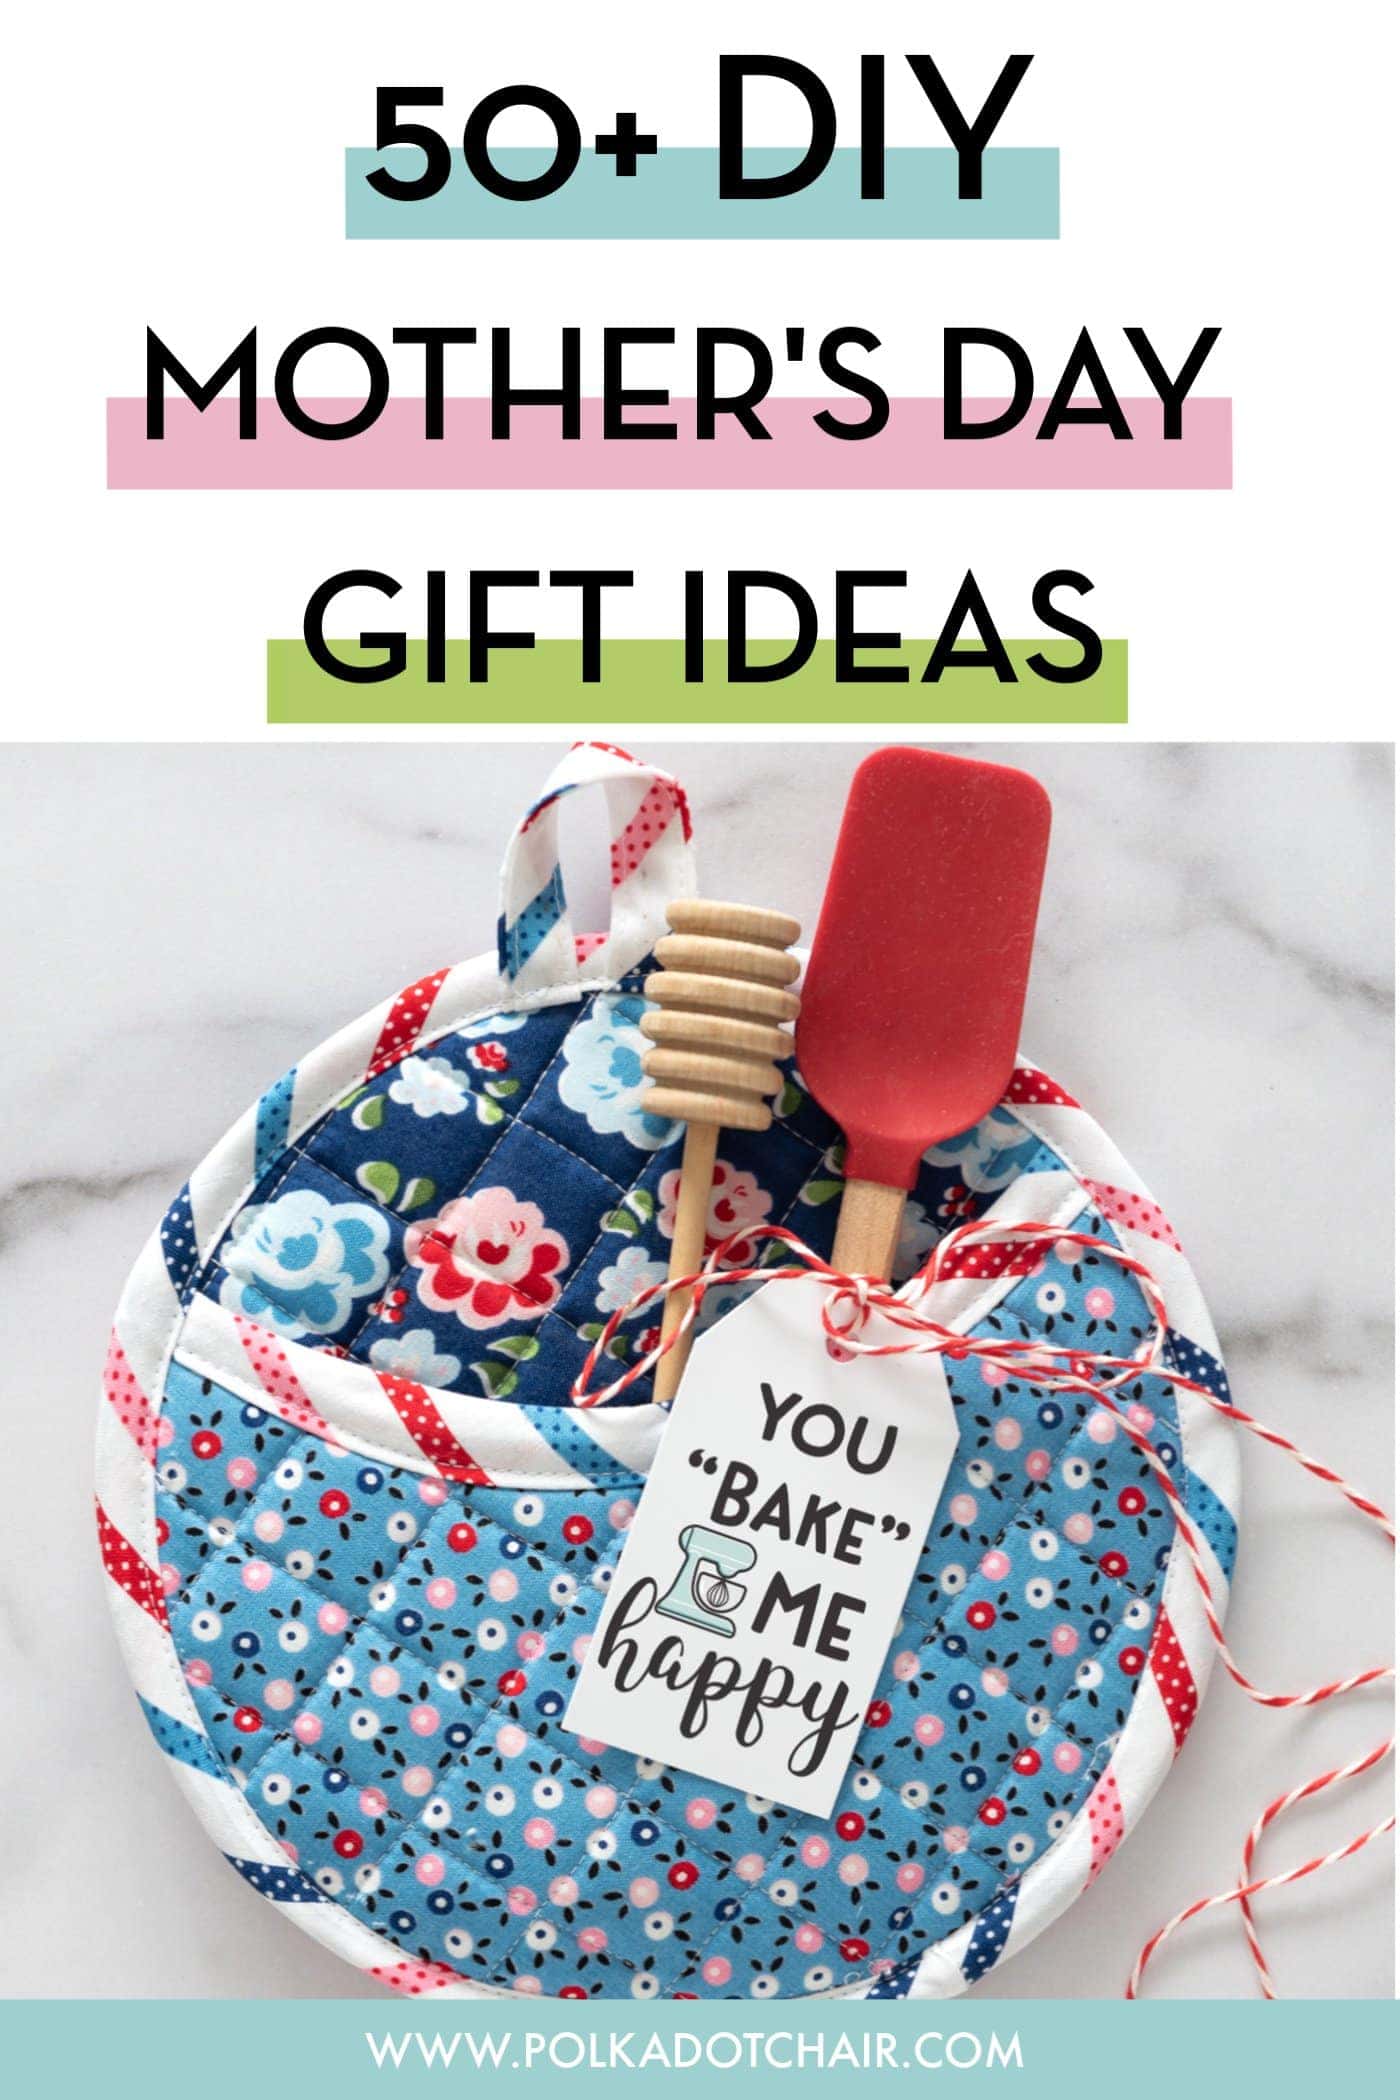 50+ DIY Mother's Day Gift Ideas & Projects | The Polka Dot ...